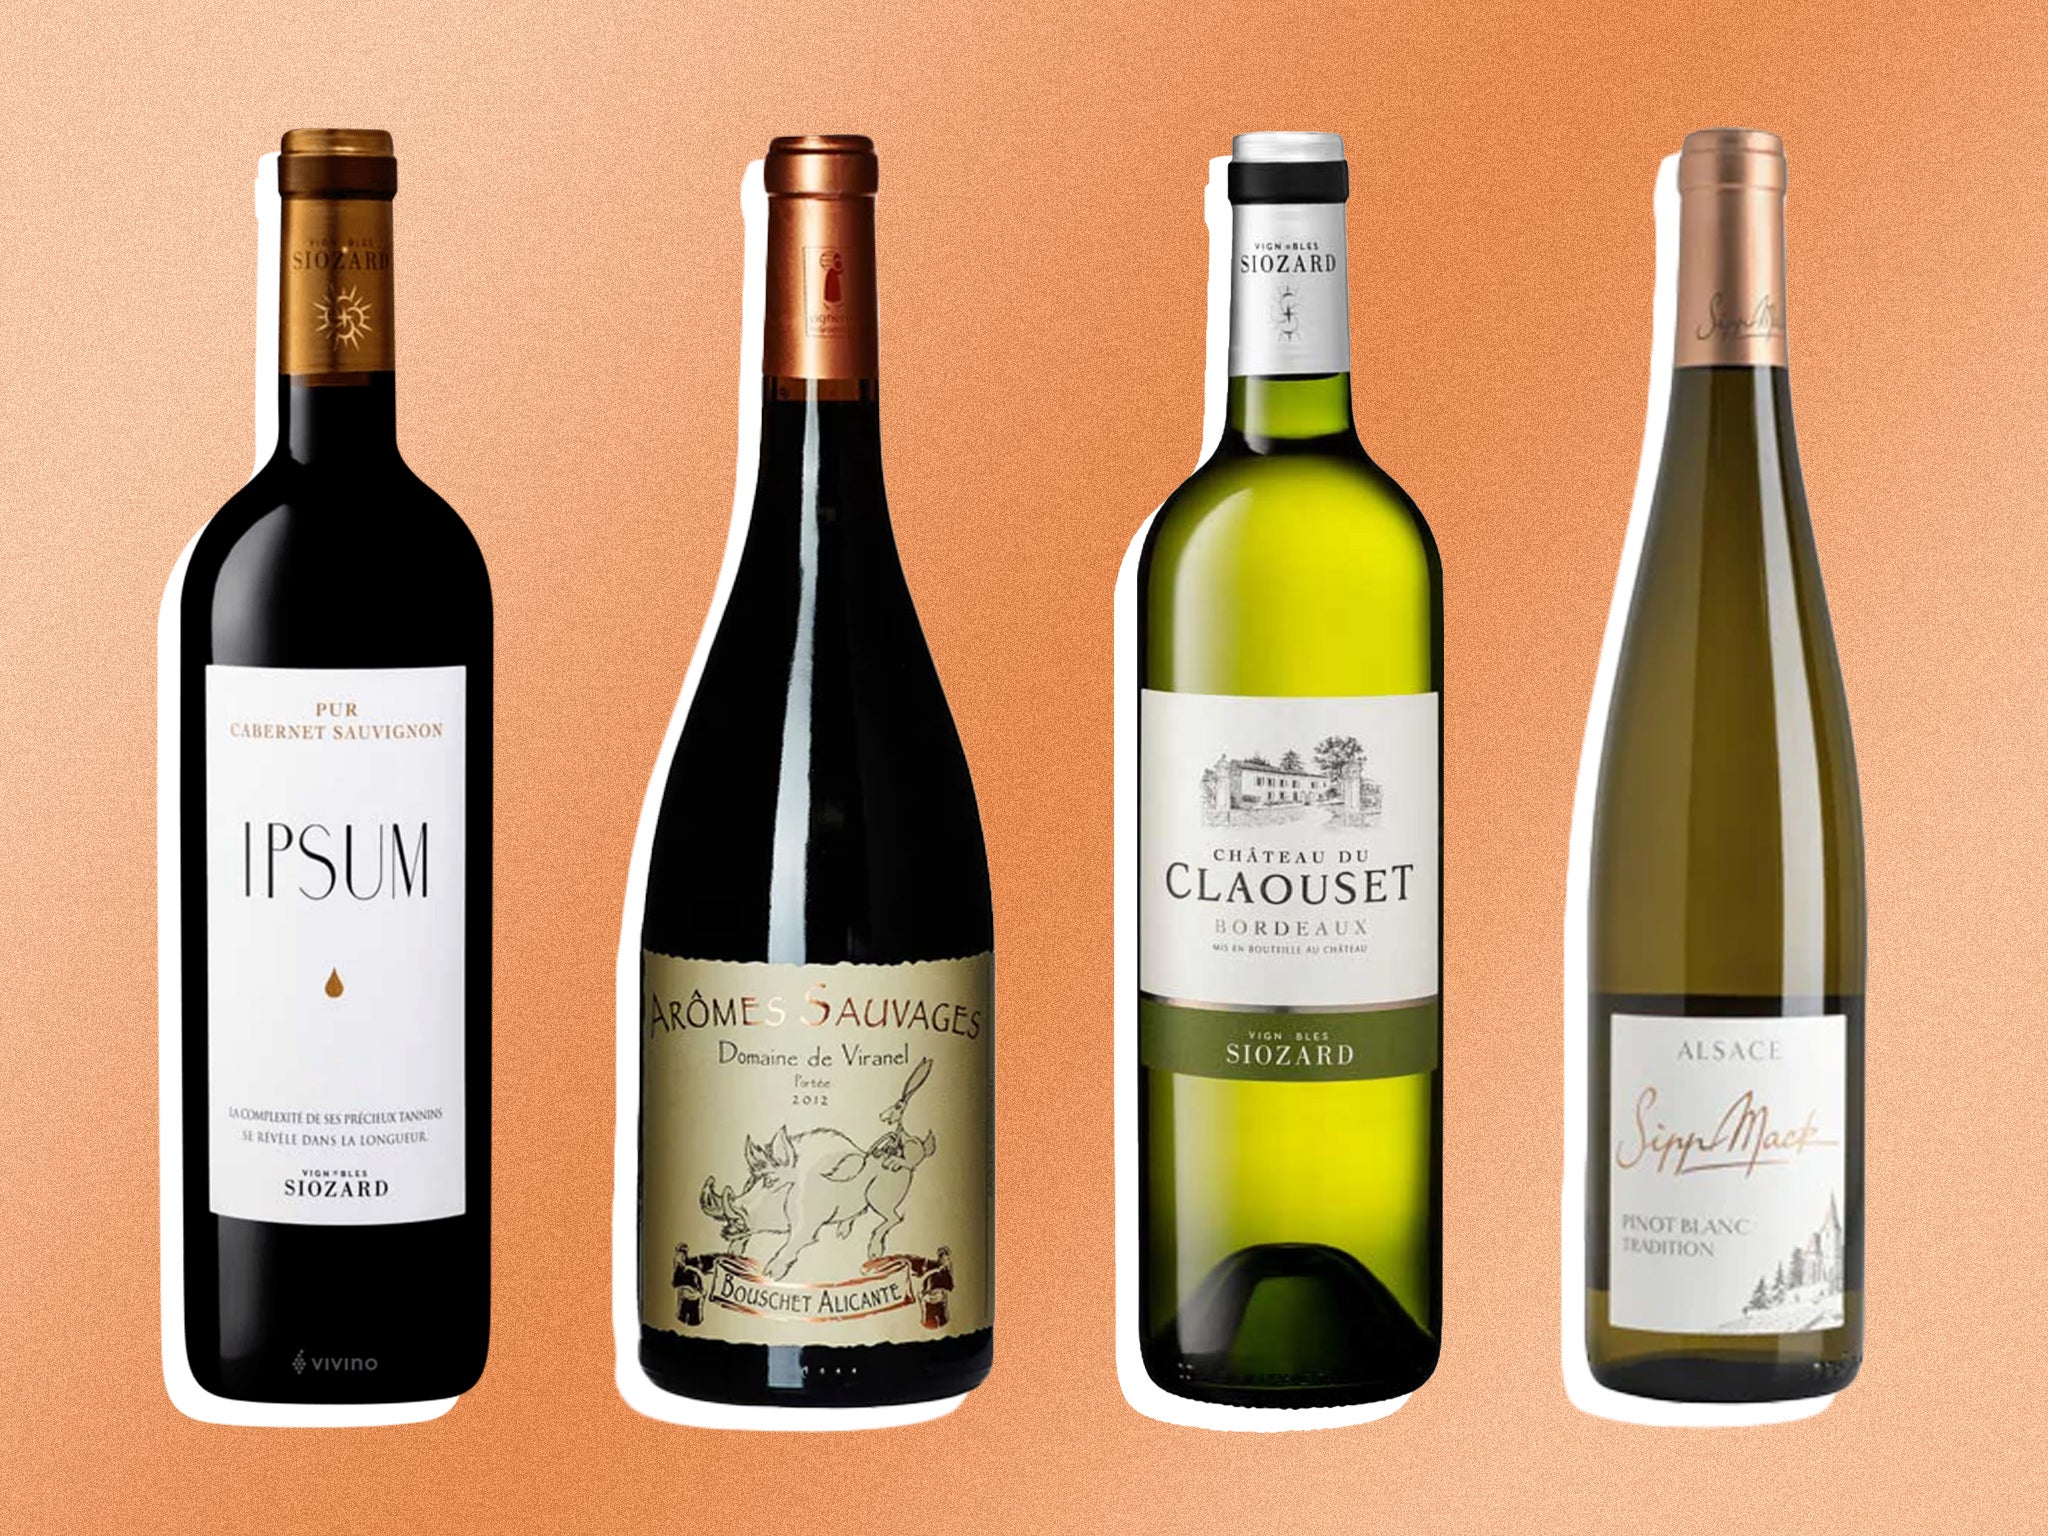 This Independent Wine Club case explores the very best of French wine